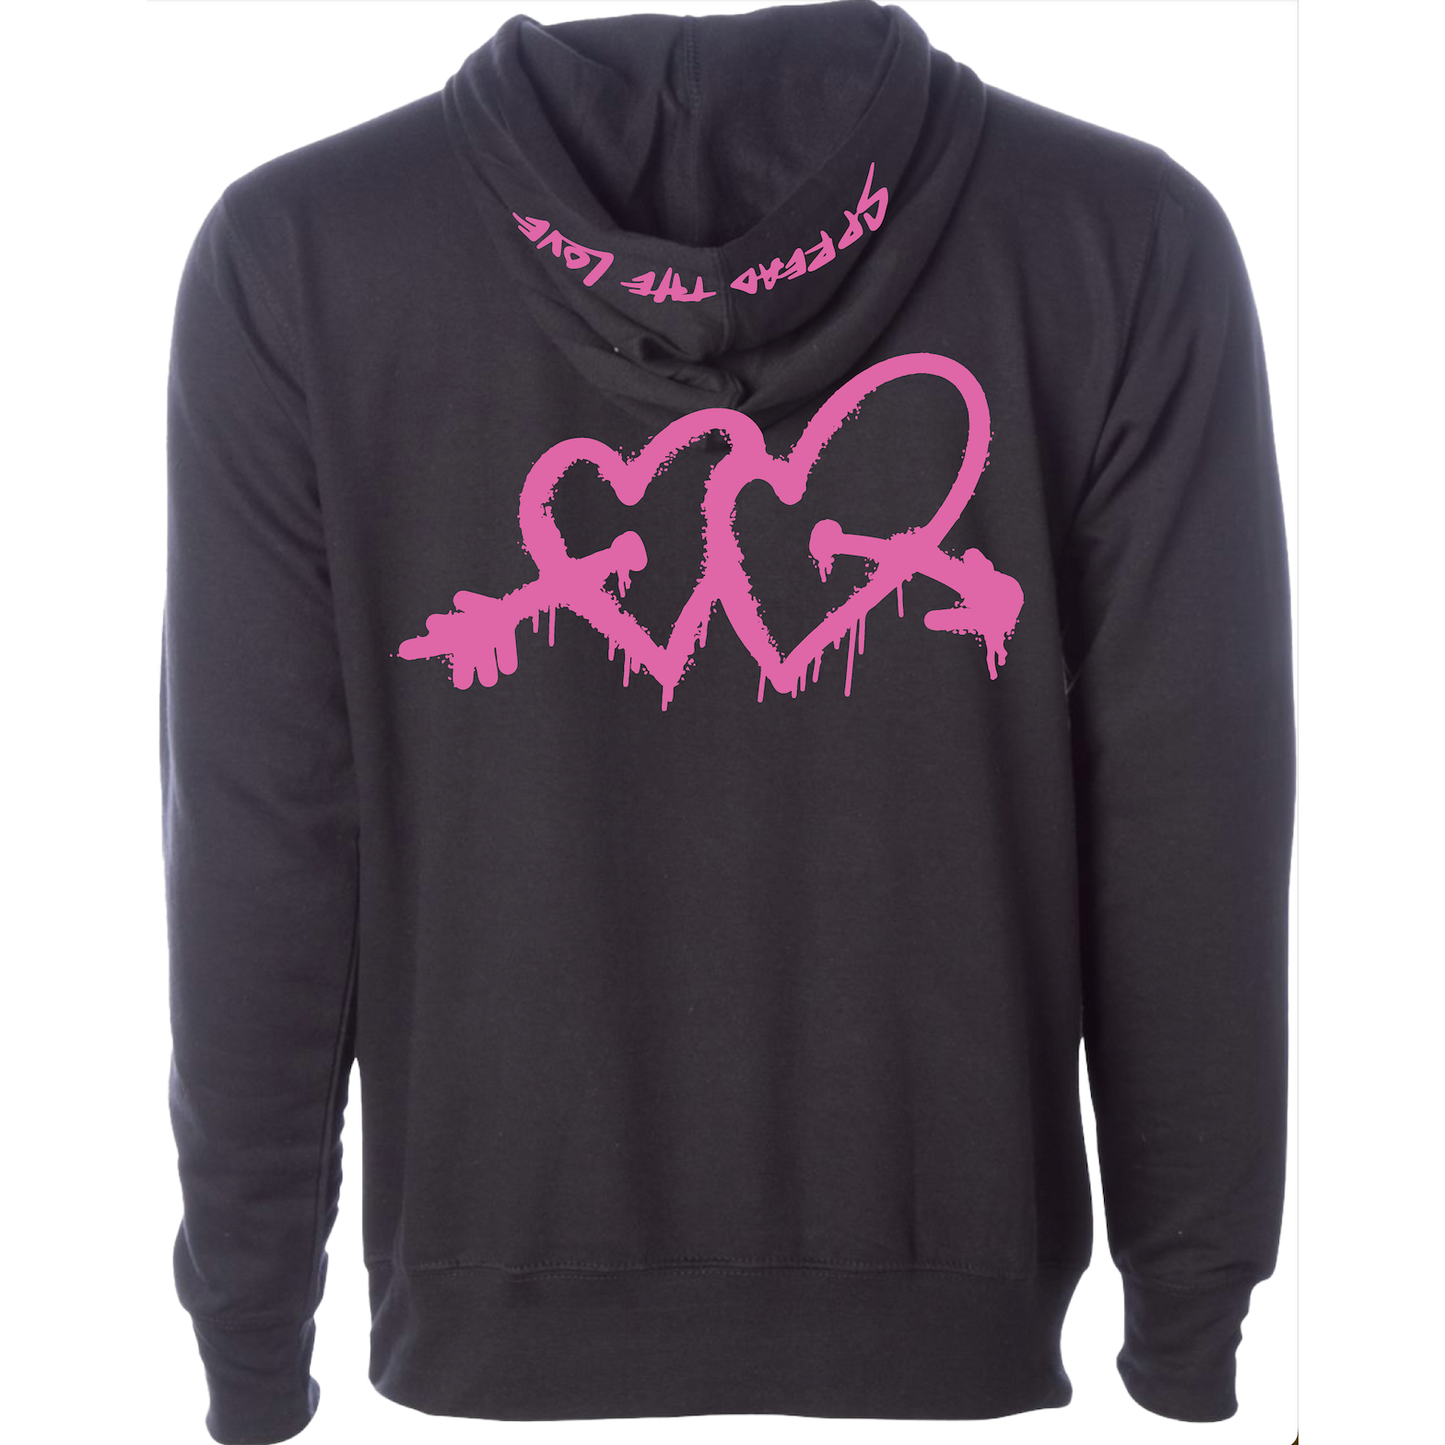 First Edition AC3 Black and Pink Hoodie